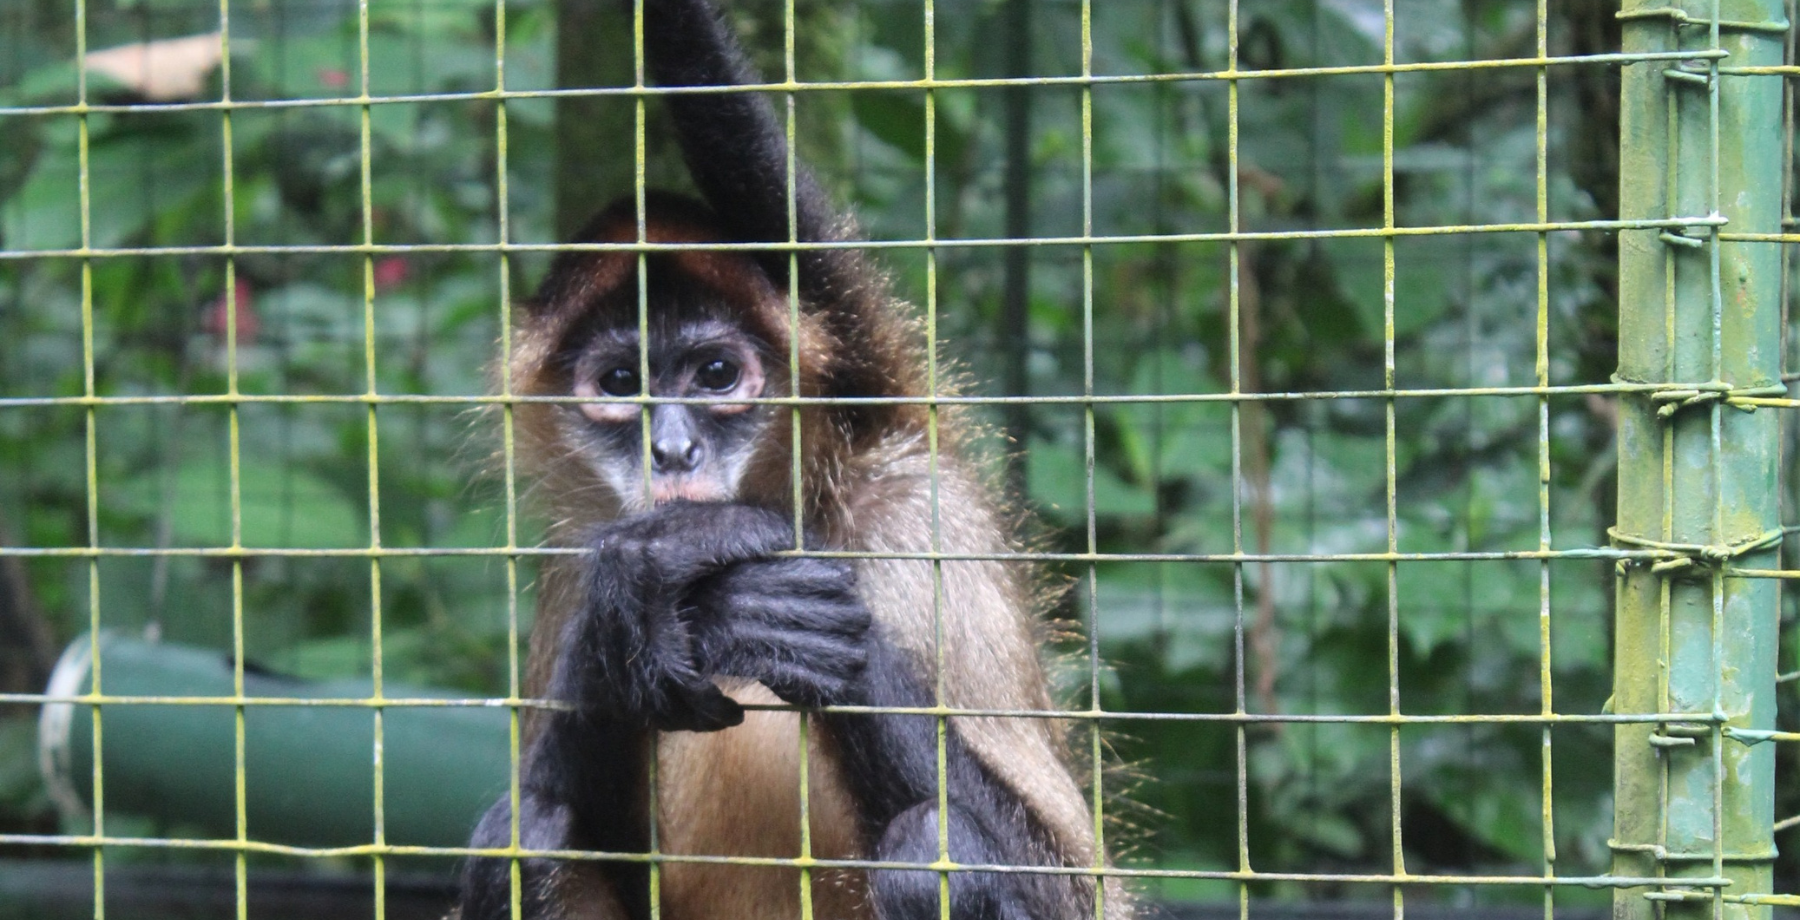 Monkey currently in rehabilitation in an enclosure